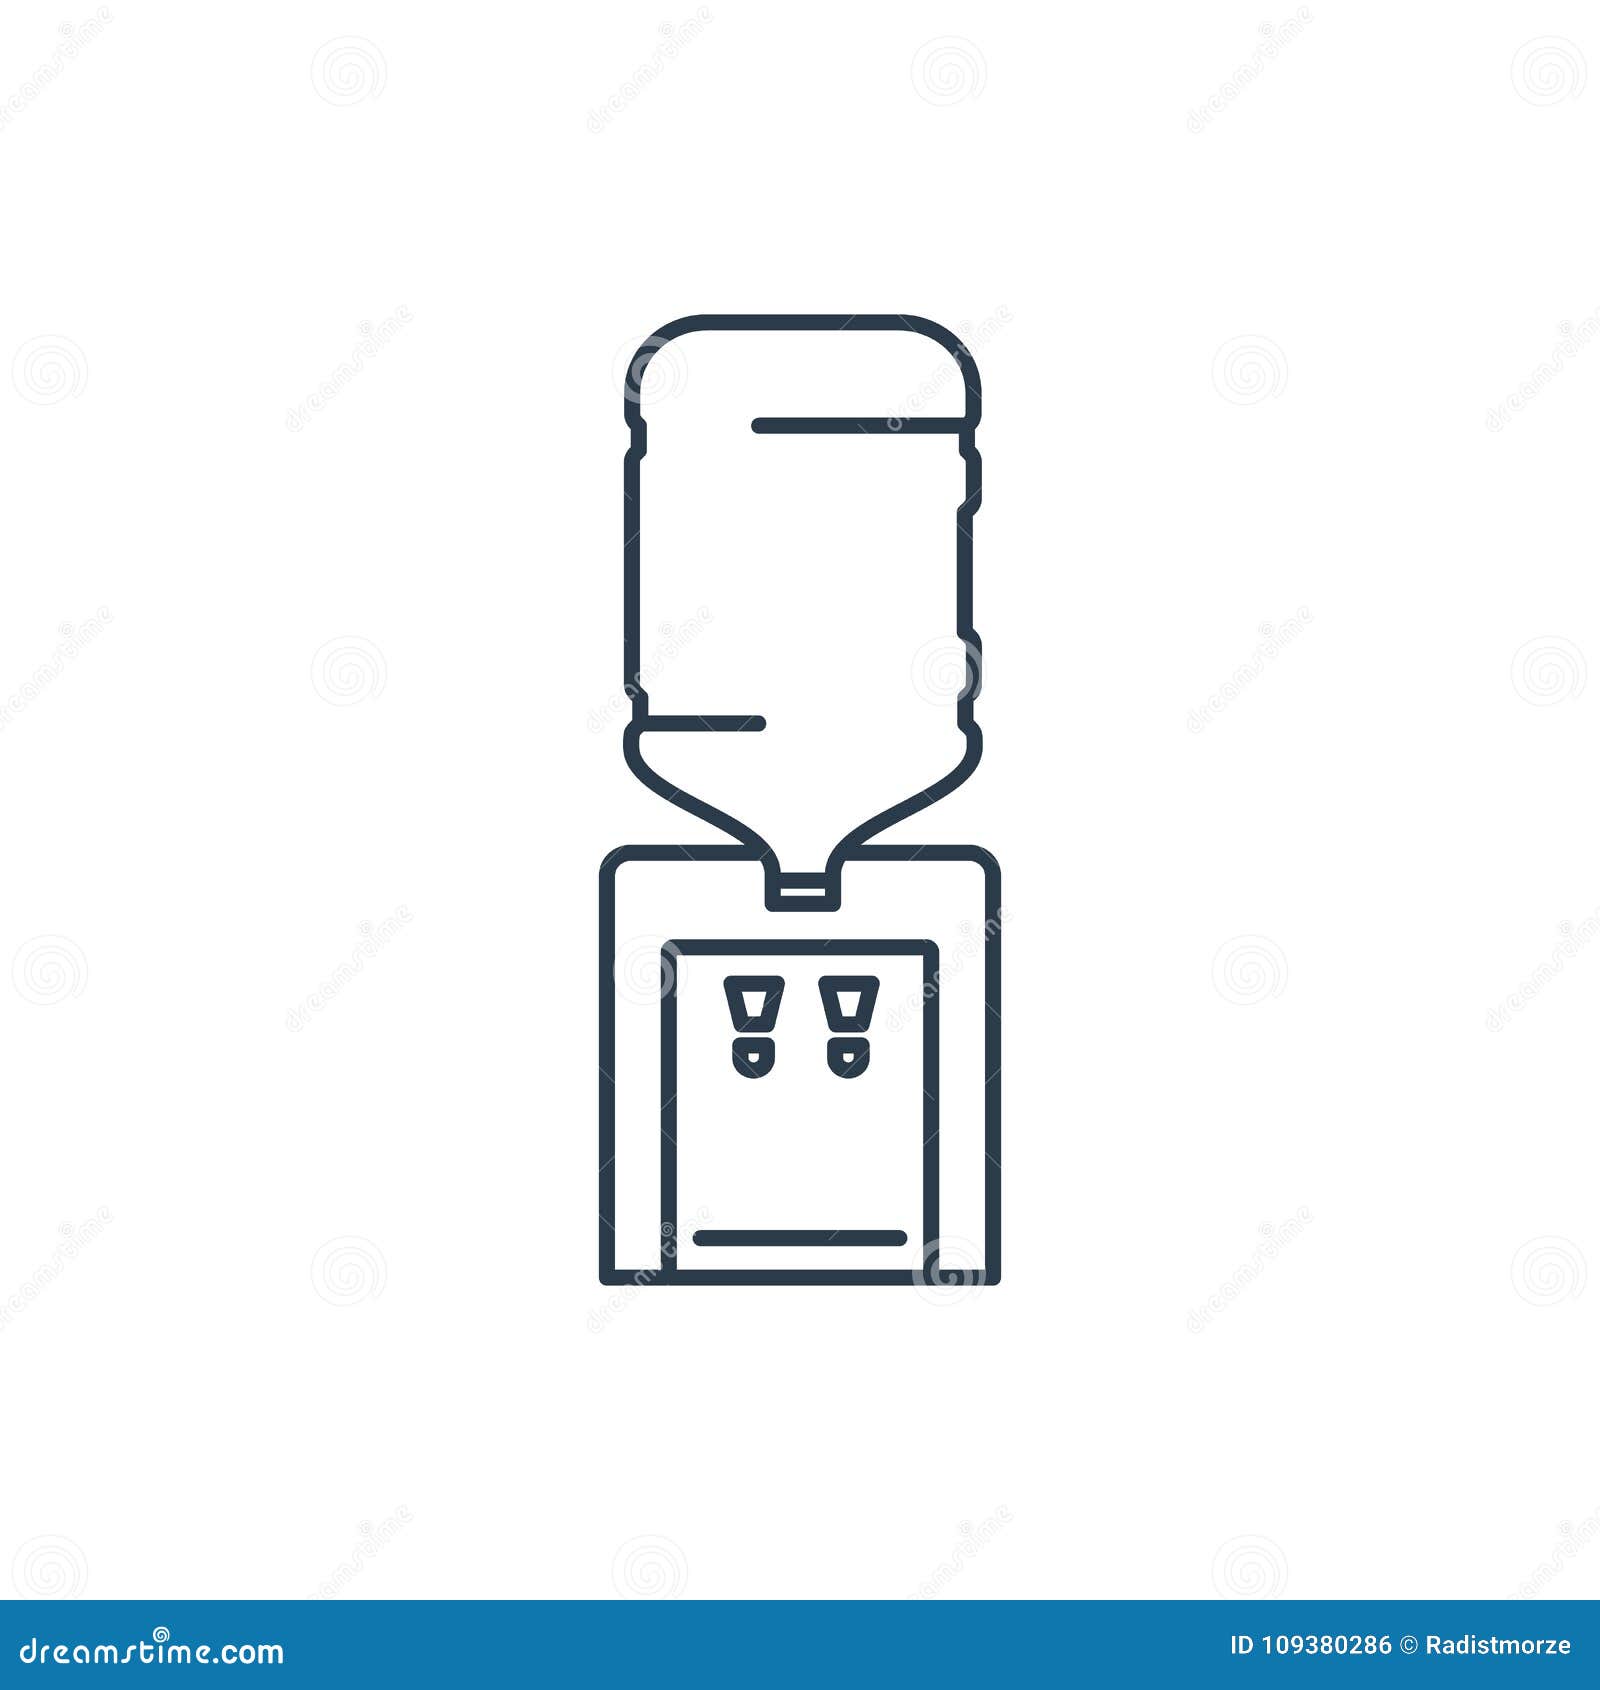 Linear water cooler icon stock illustration. Illustration of business ...